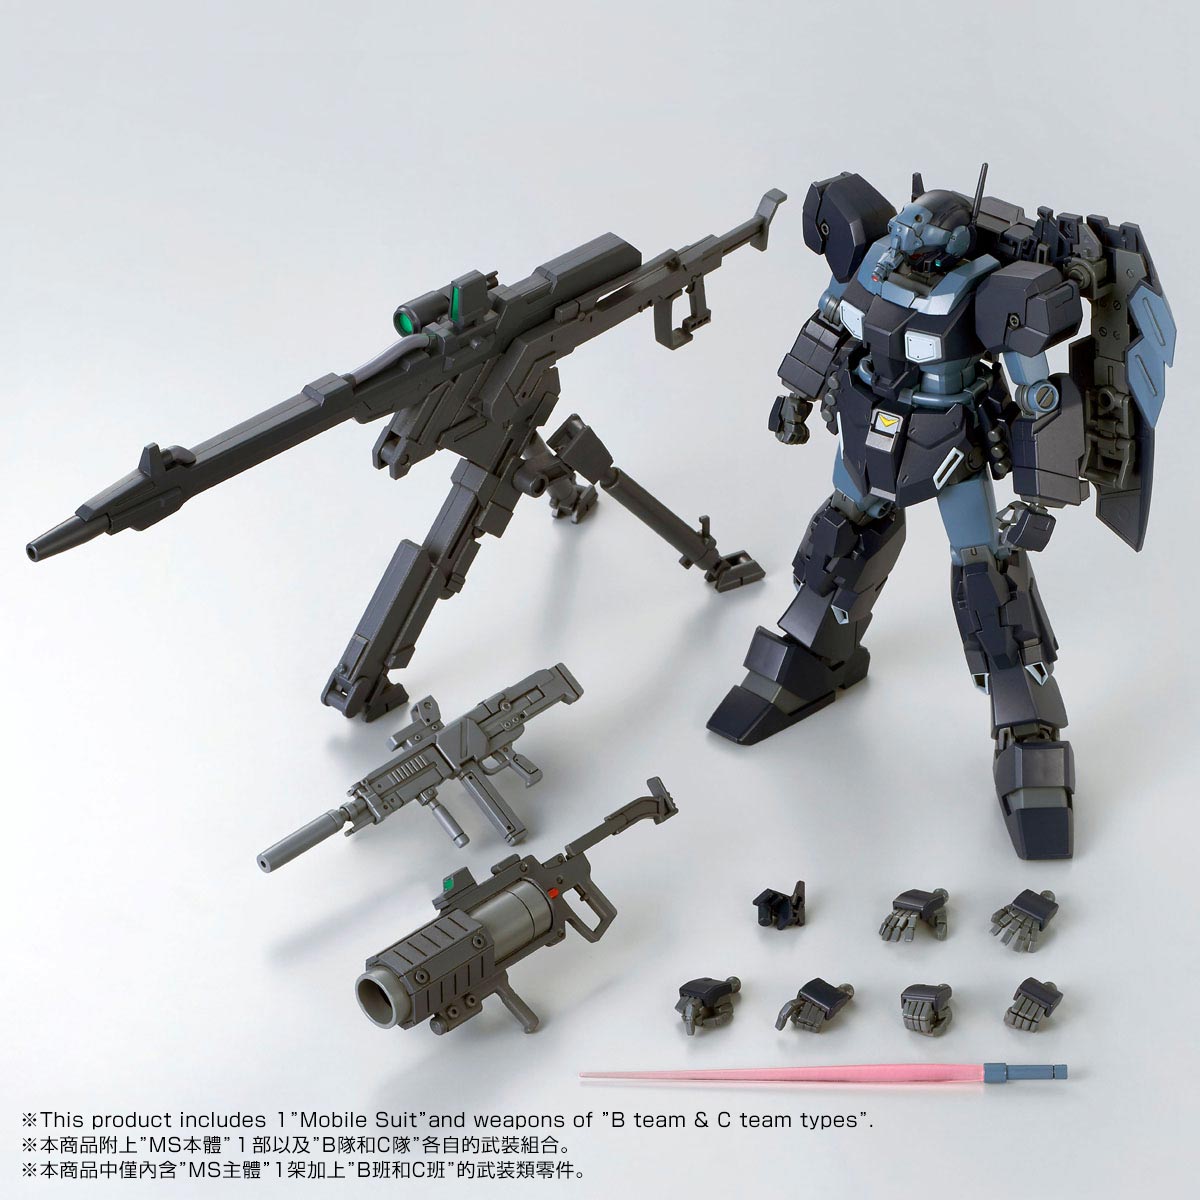 Hg 1 144 Jesta Shezarr Type Team B C March 19 Delivery Gundam Premium Bandai Singapore Online Store For Action Figures Model Kits Toys And More